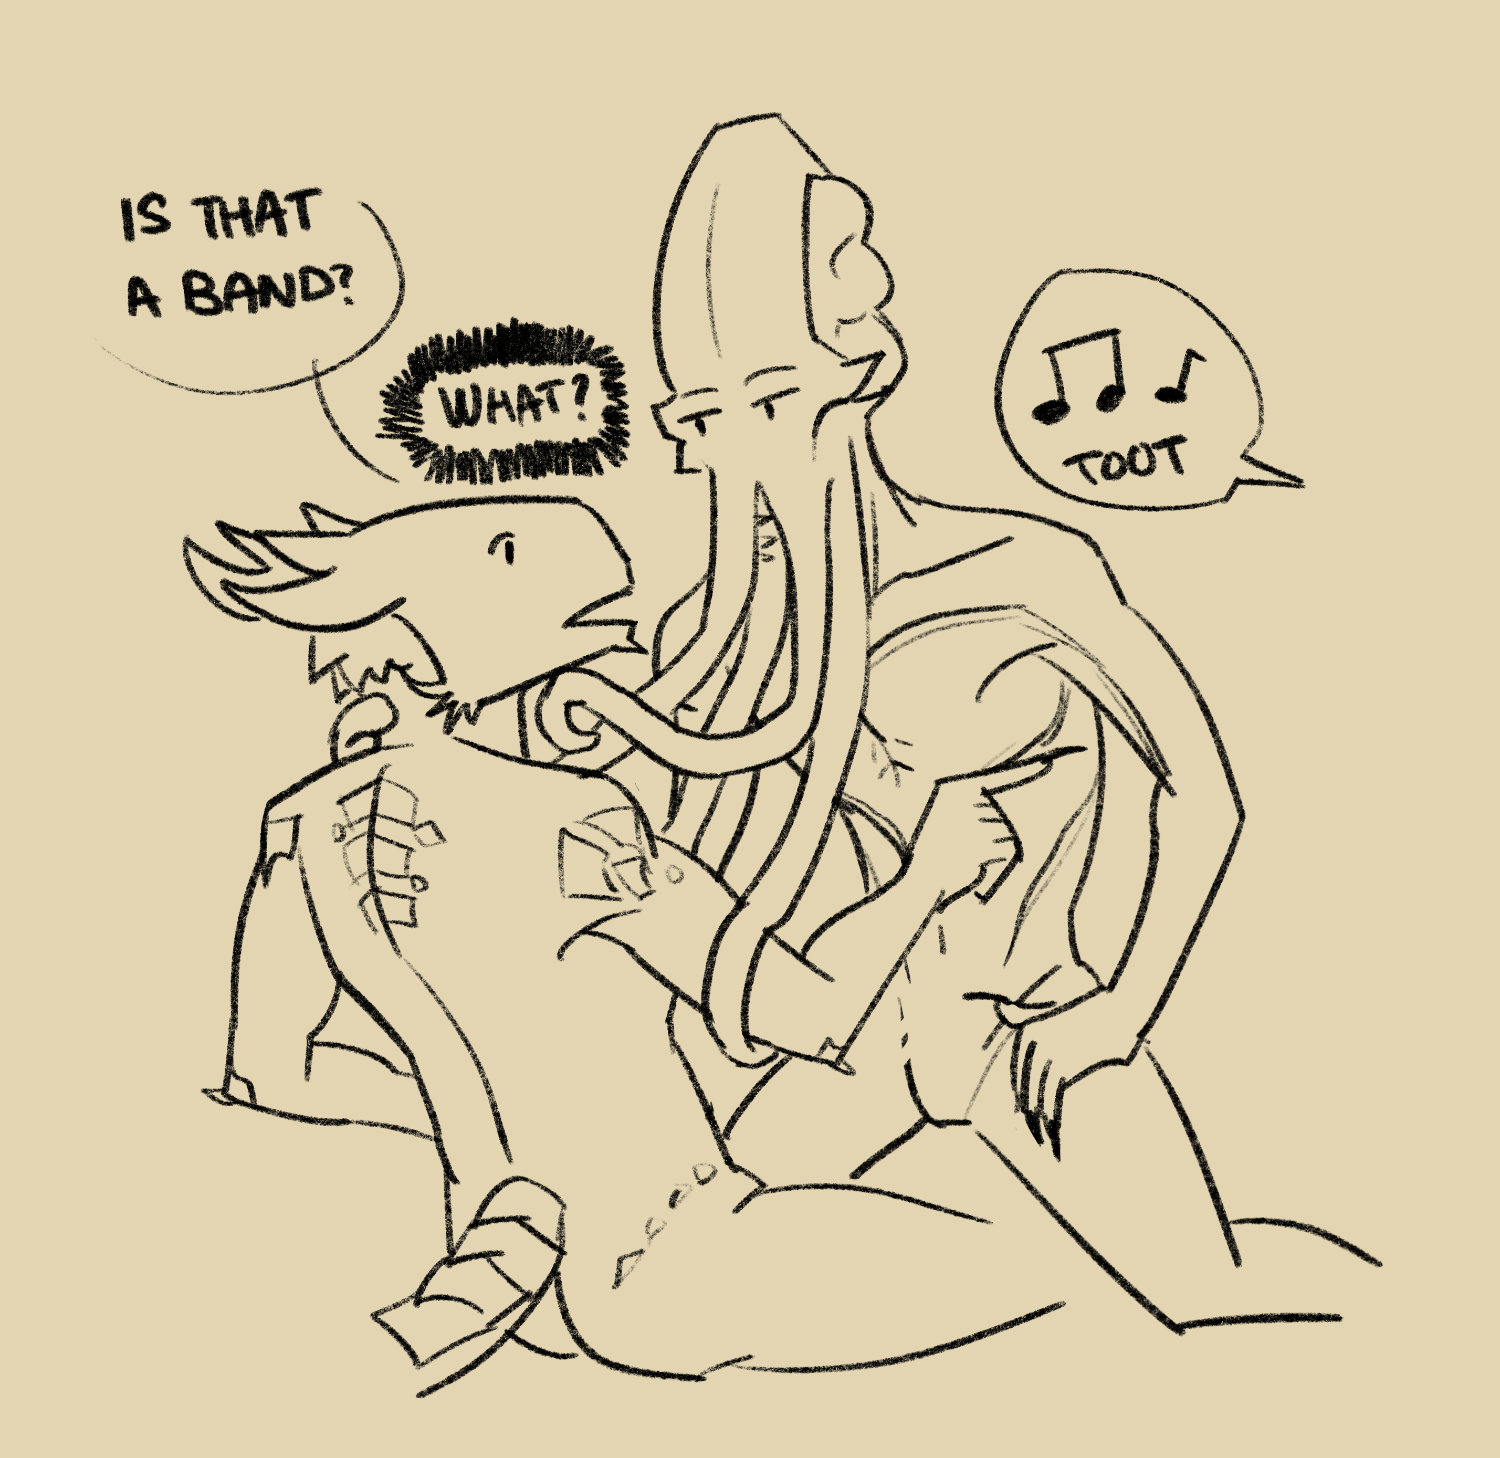 Daamric and the Emperor are naked and about to smooch, but Daamric points at something offscreen with: 'Is that a band?' The Emperor, looking at Daamric, goes: 'What?'. In the distance, there is a distant musical toot.